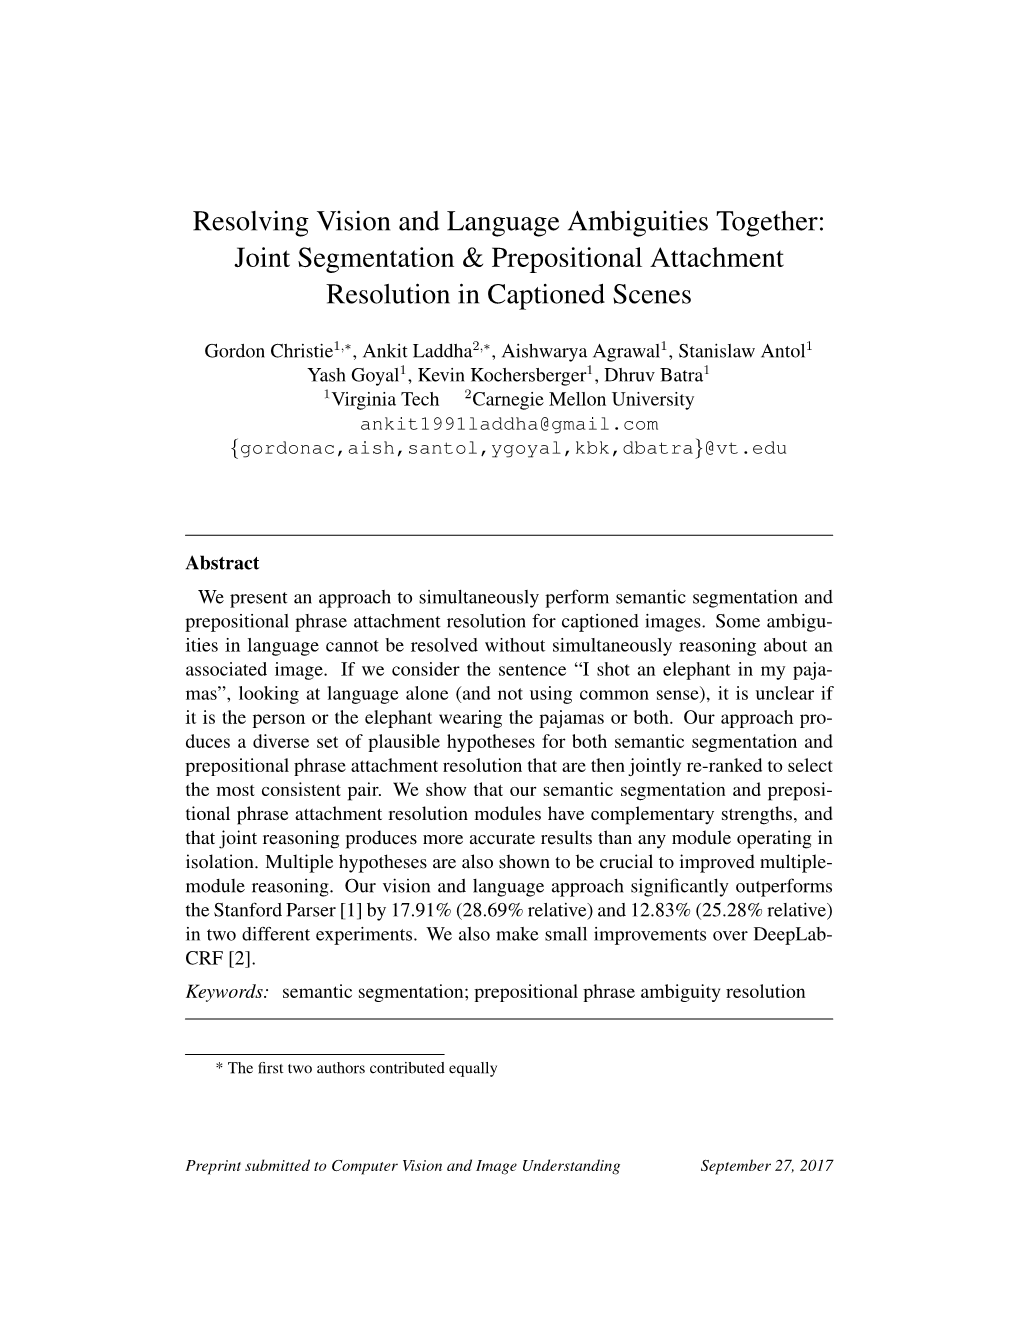 Resolving Vision and Language Ambiguities Together: Joint Segmentation & Prepositional Attachment Resolution in Captioned Scenes